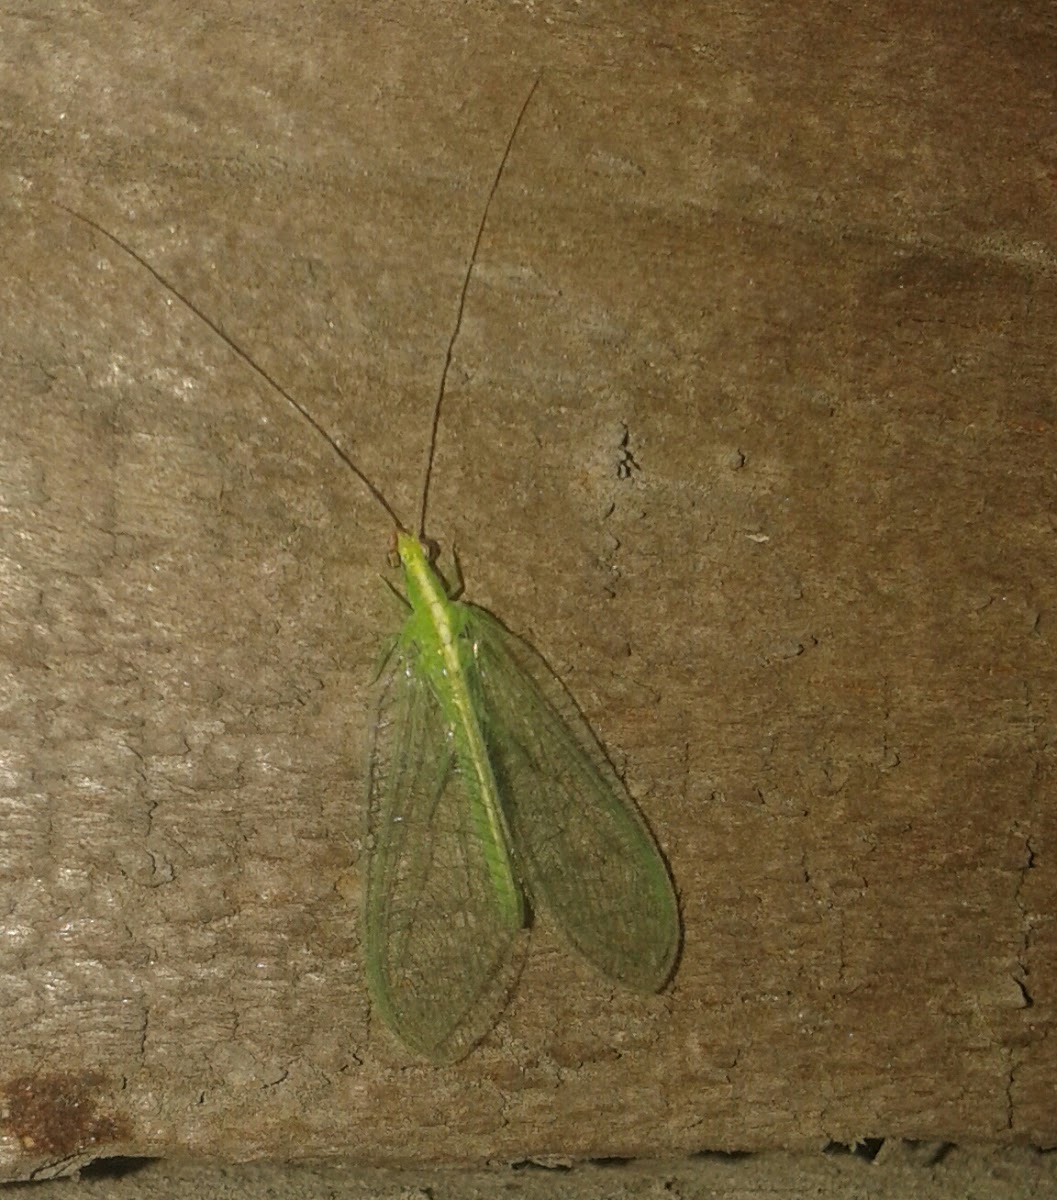 Green Lacewing